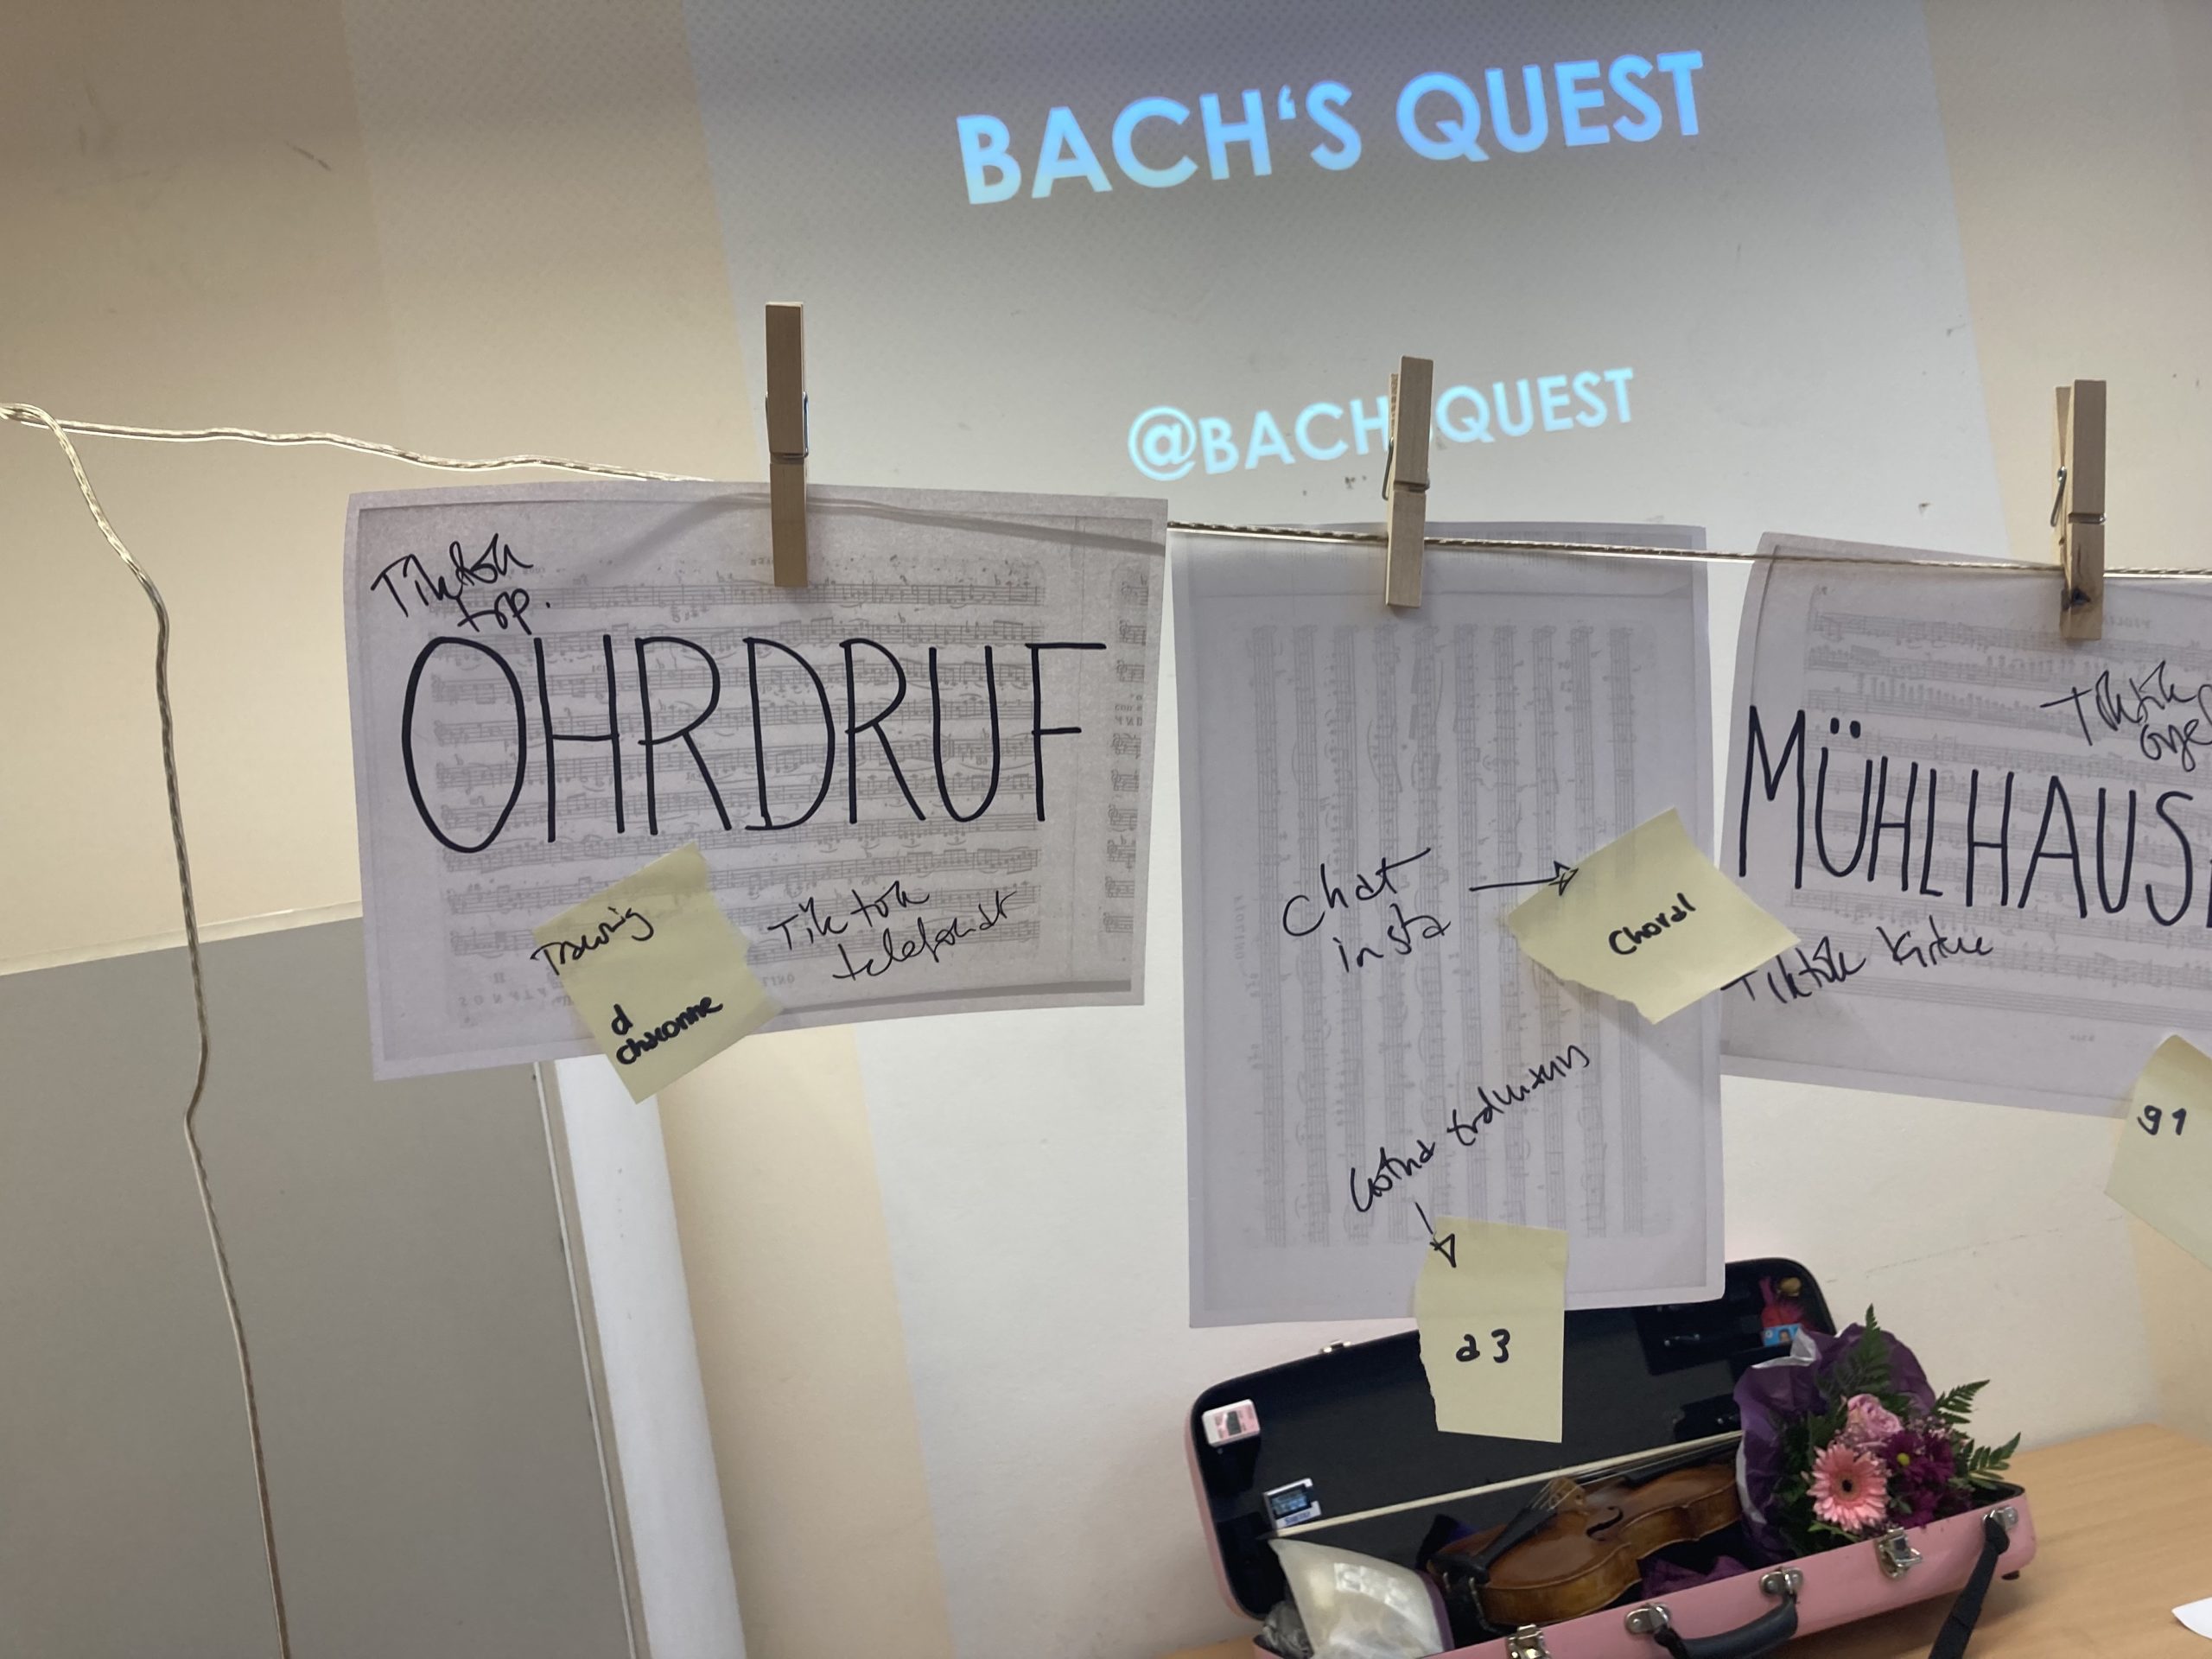 washing line with A4 pages with town names of Bach's journey hanging from it